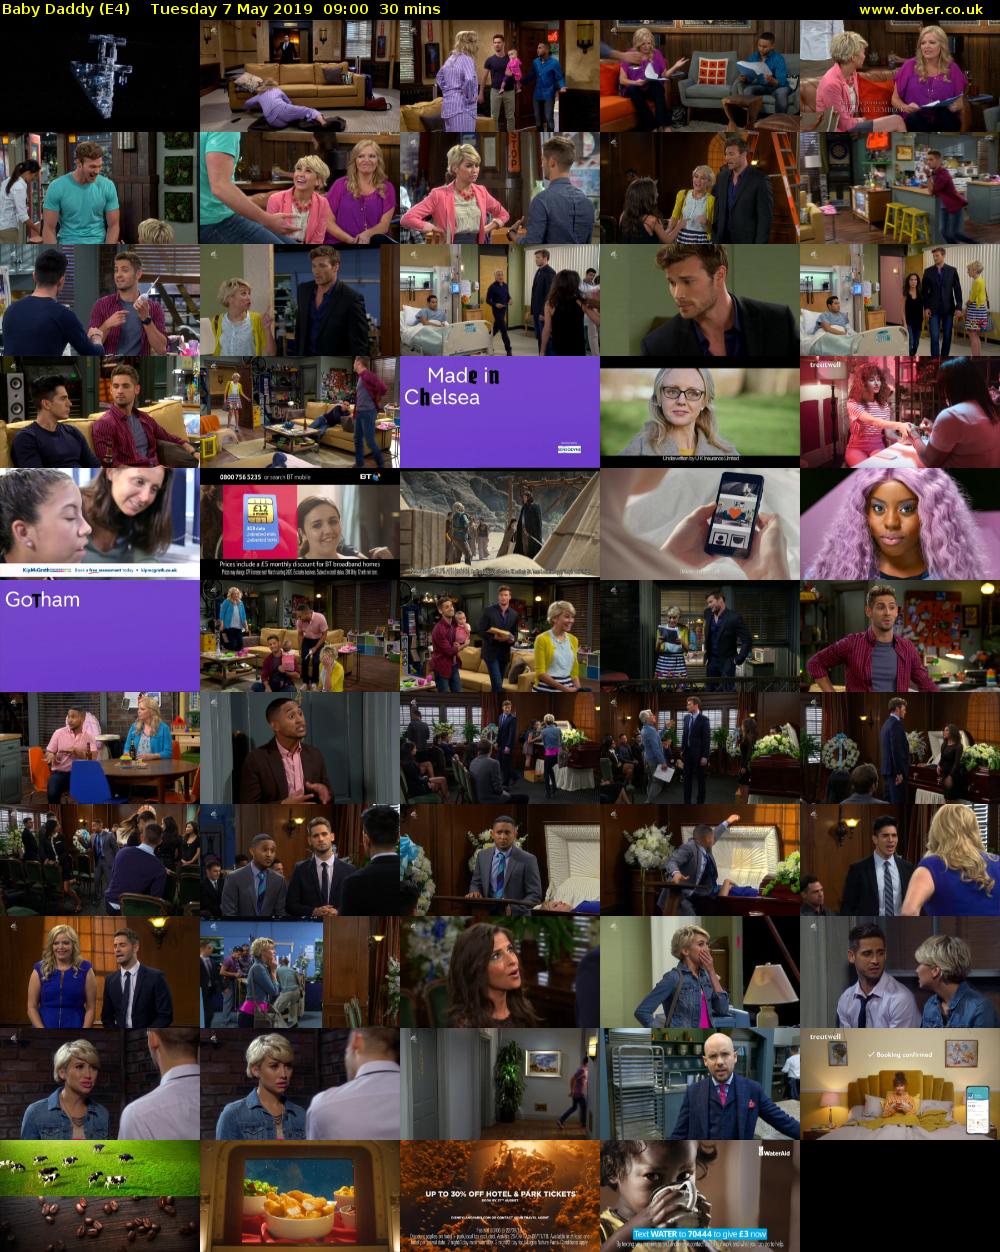 Baby Daddy (E4) Tuesday 7 May 2019 09:00 - 09:30